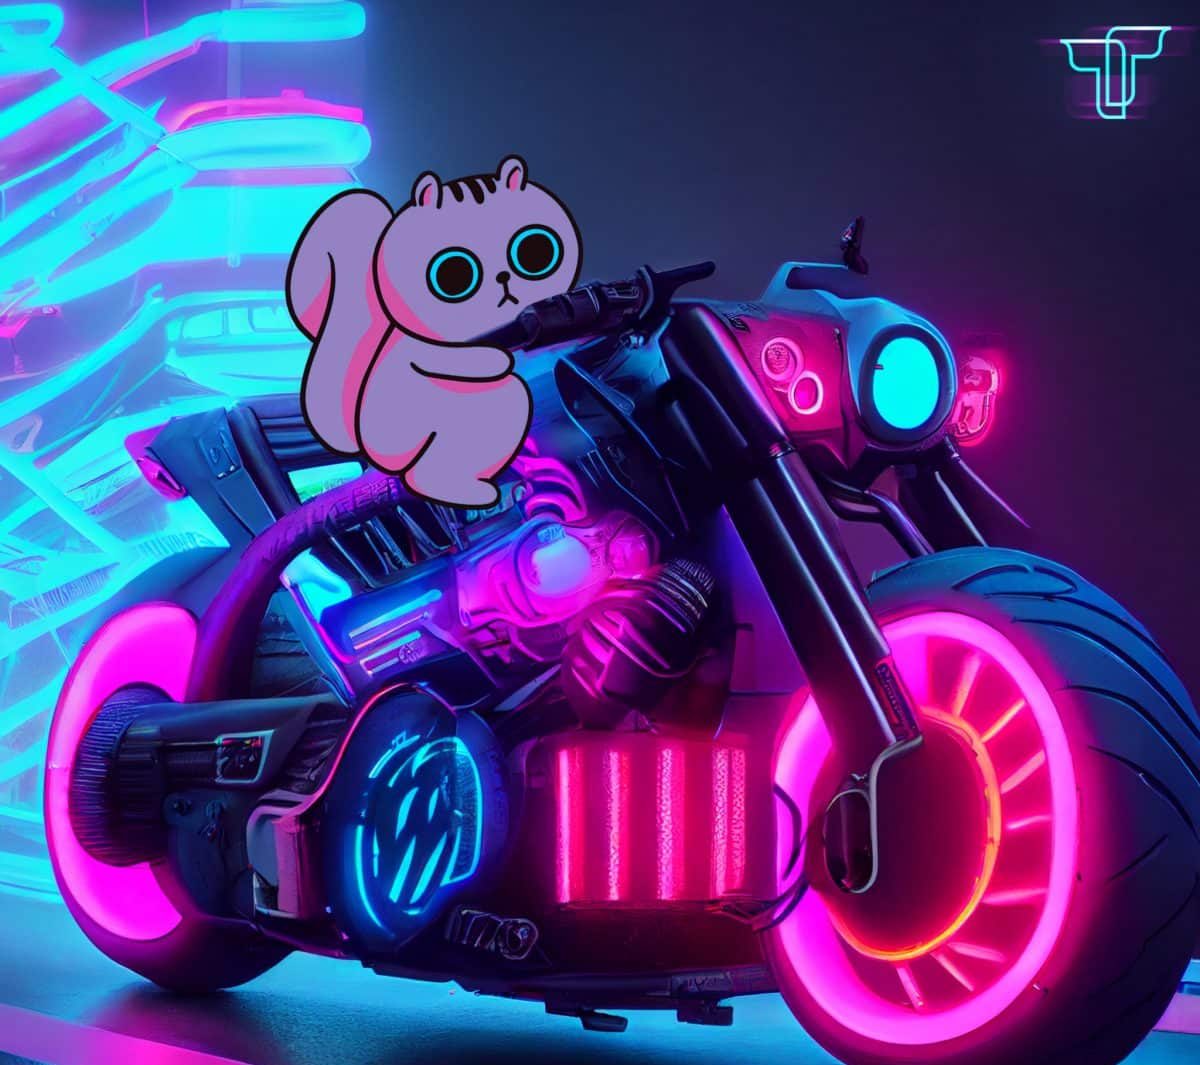 NFTTCity features the savior of web3, TT, riding a futuristic motorcycle.